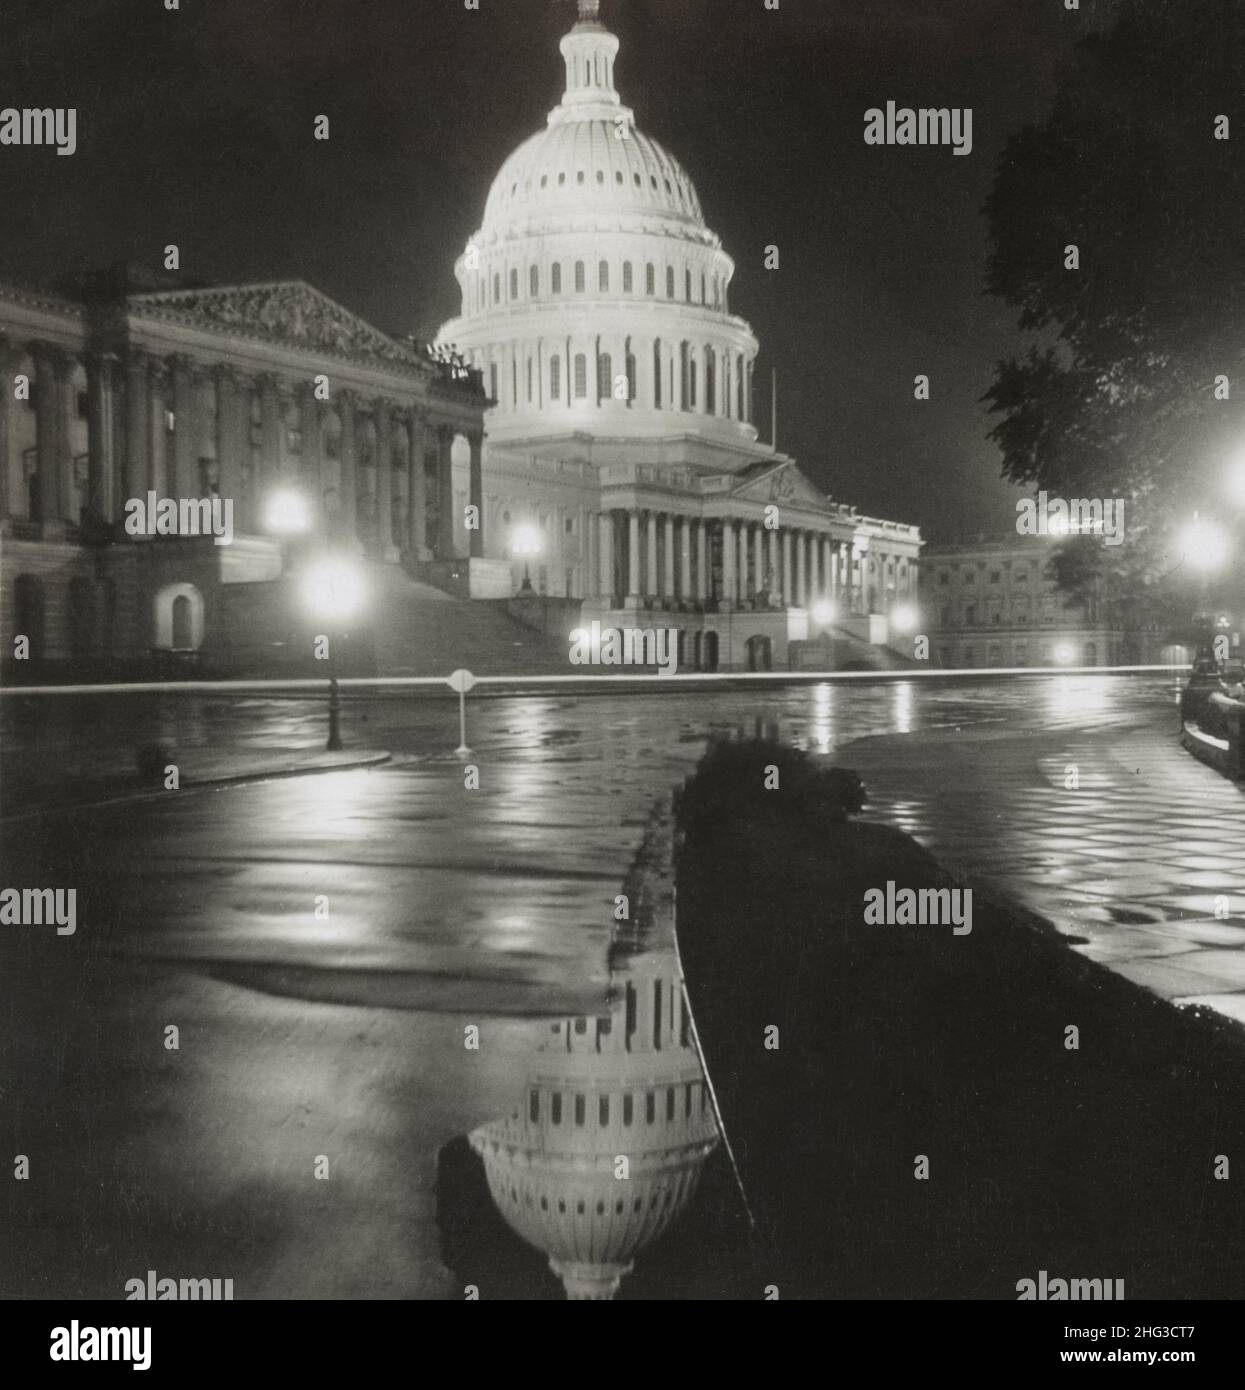 Vintage photo of the Dazzling dome of the Capitol on a rainy night, Washington, D.C. USA. 1920s Stock Photo